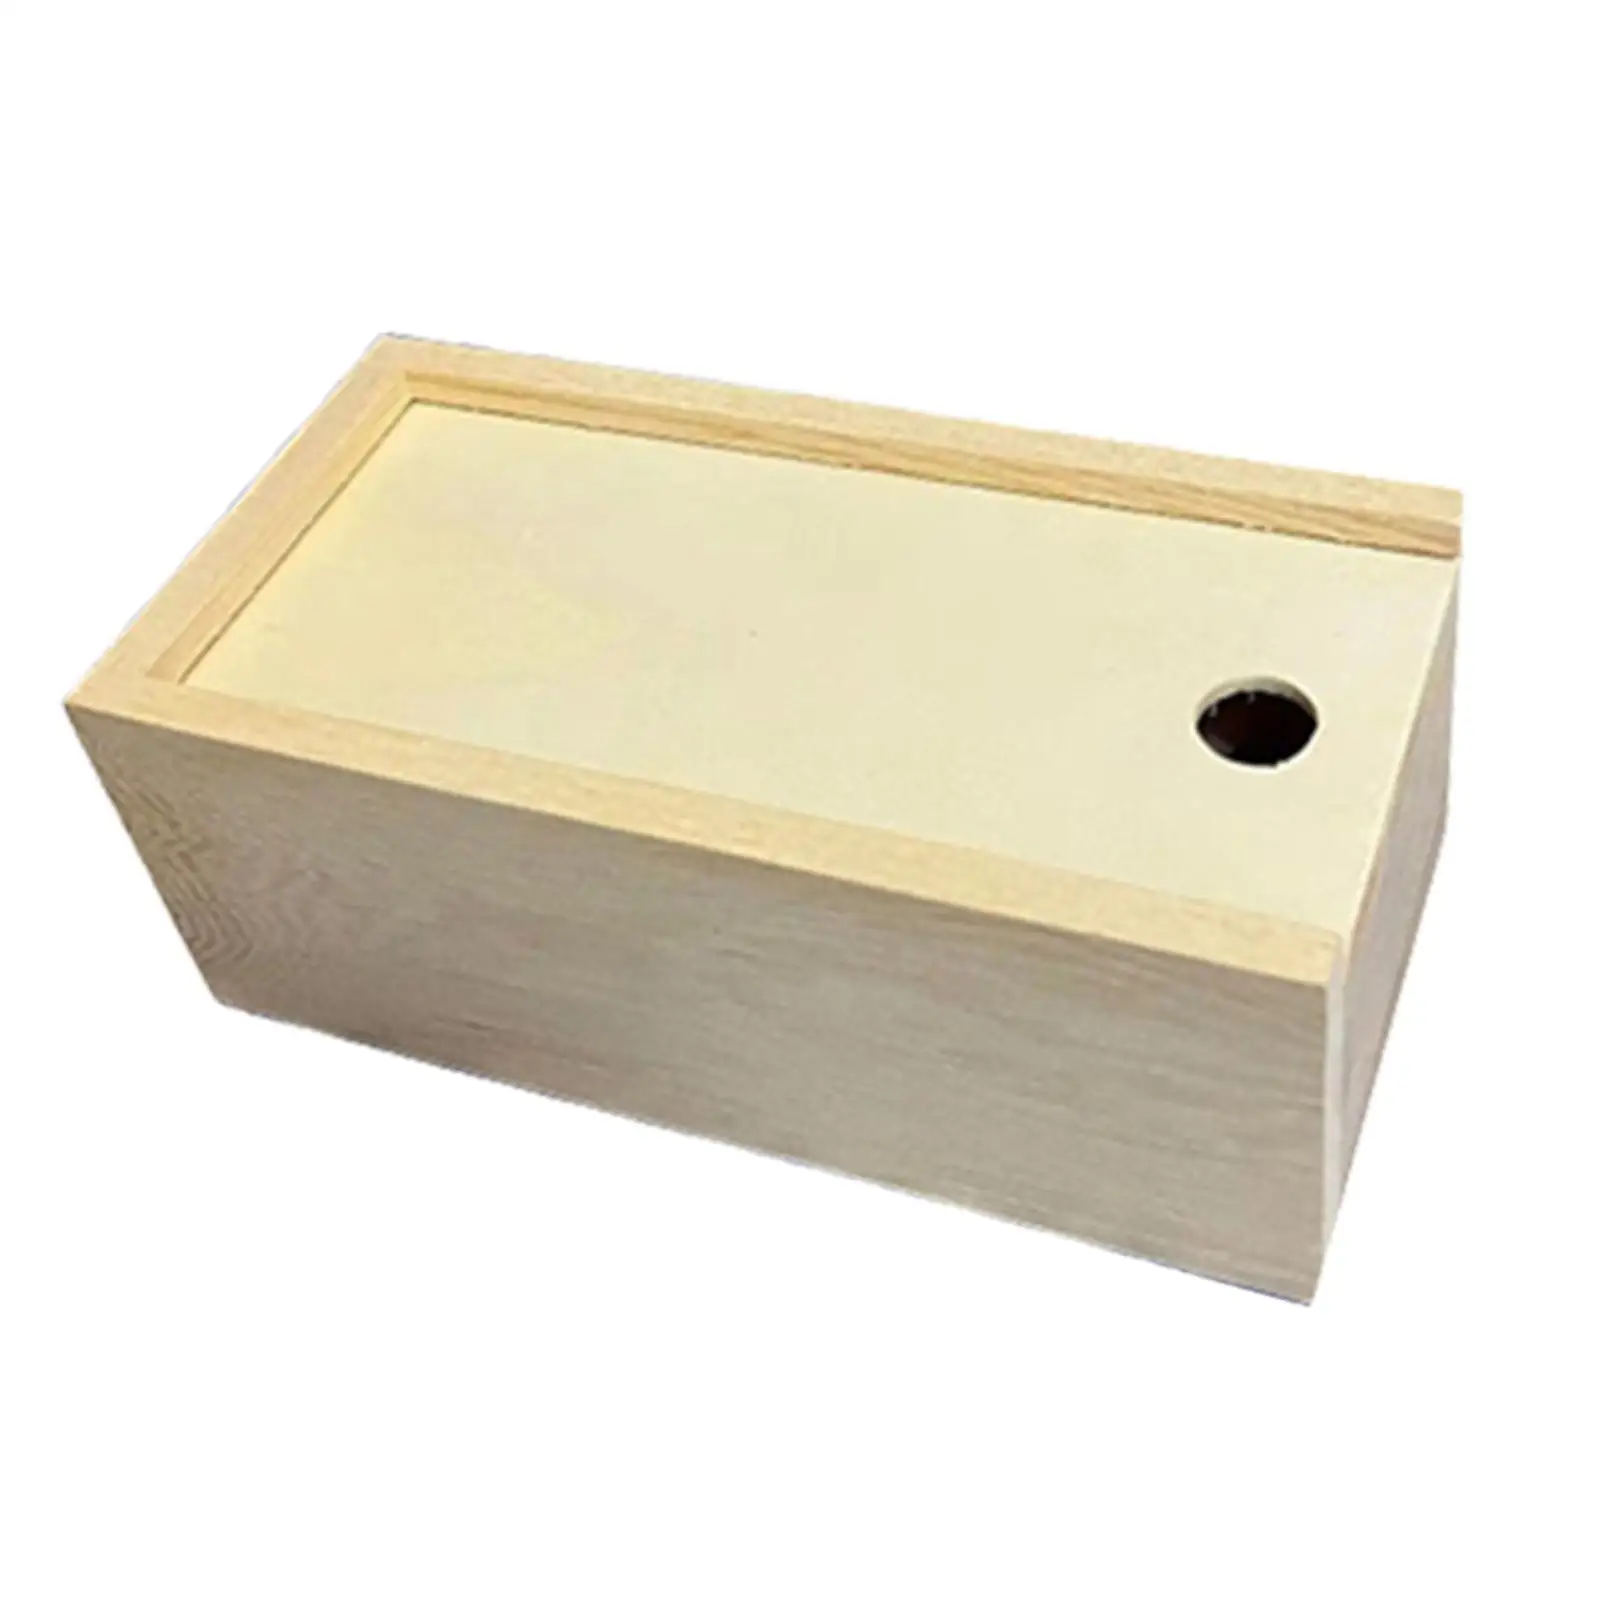 Wooden Makeup Organizer Thick Practical Stylish Desk Organizer Household Durable for Living Room Bathroom Countertop Pen